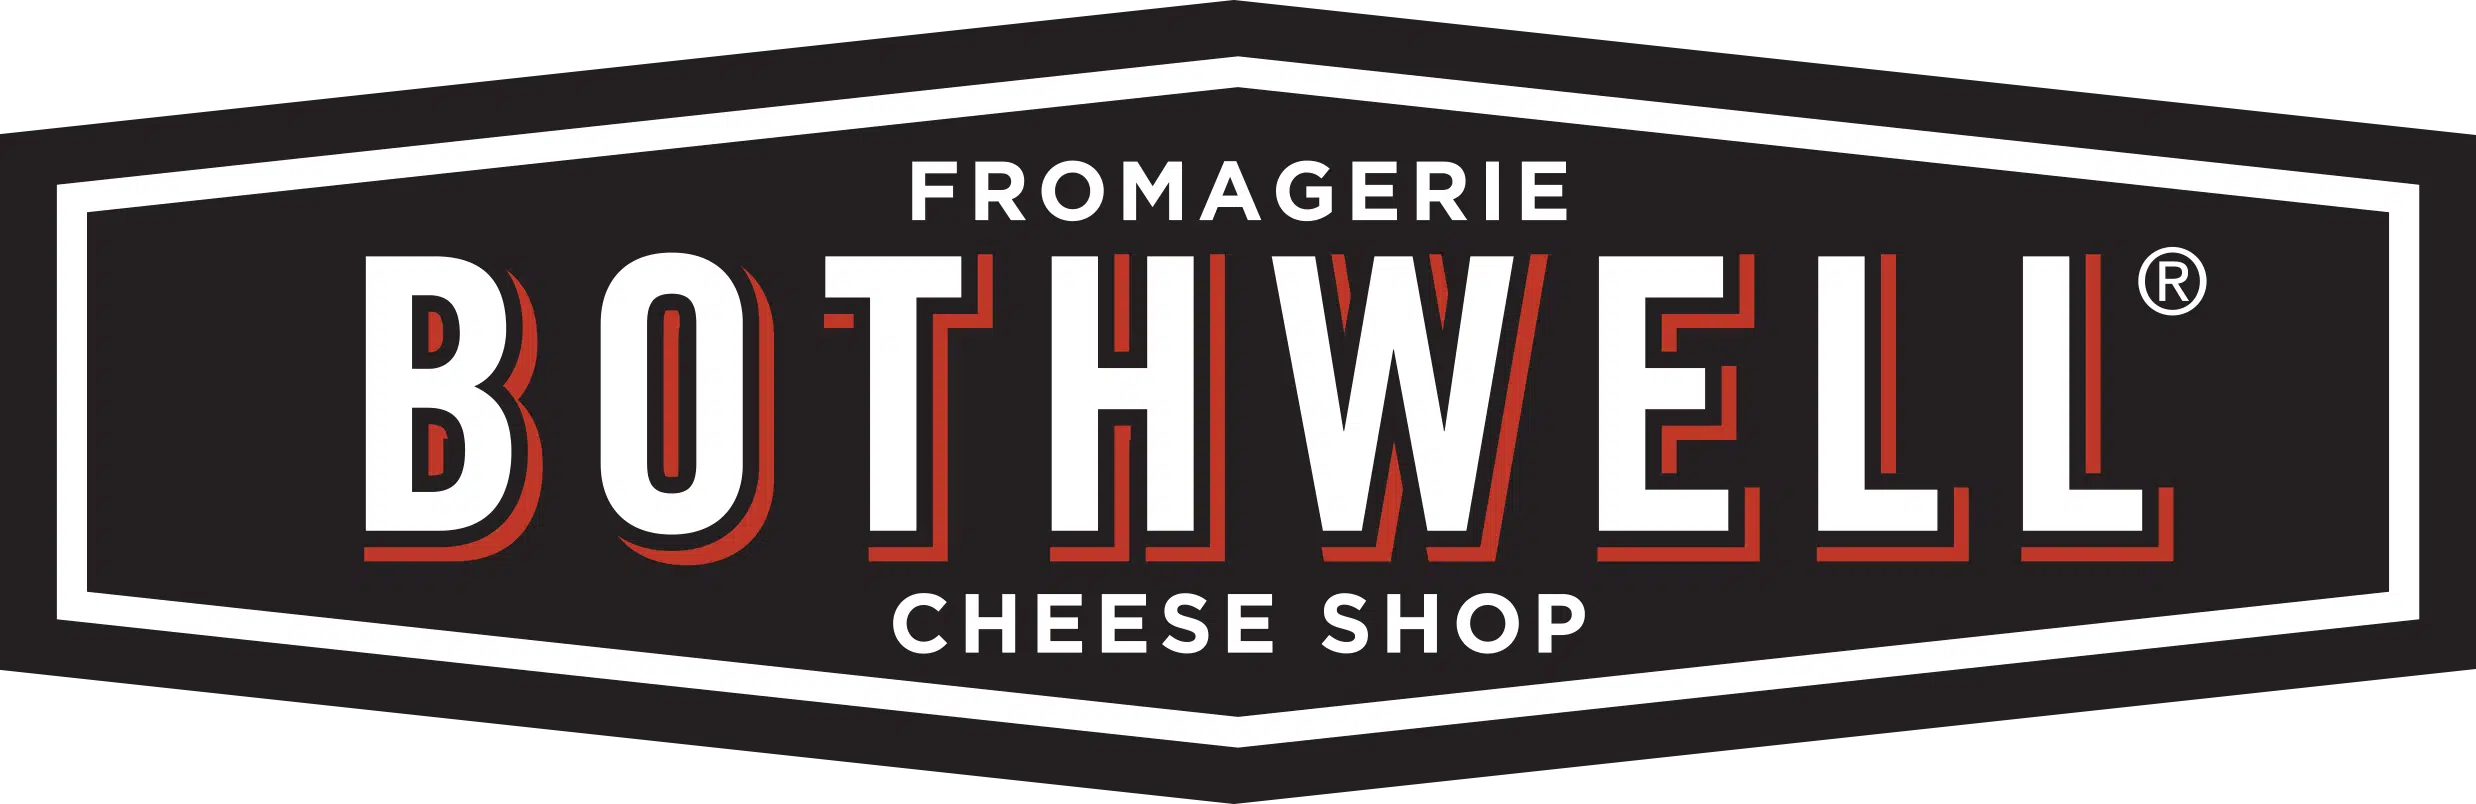 Featured image for “Fromagerie Bothwell”